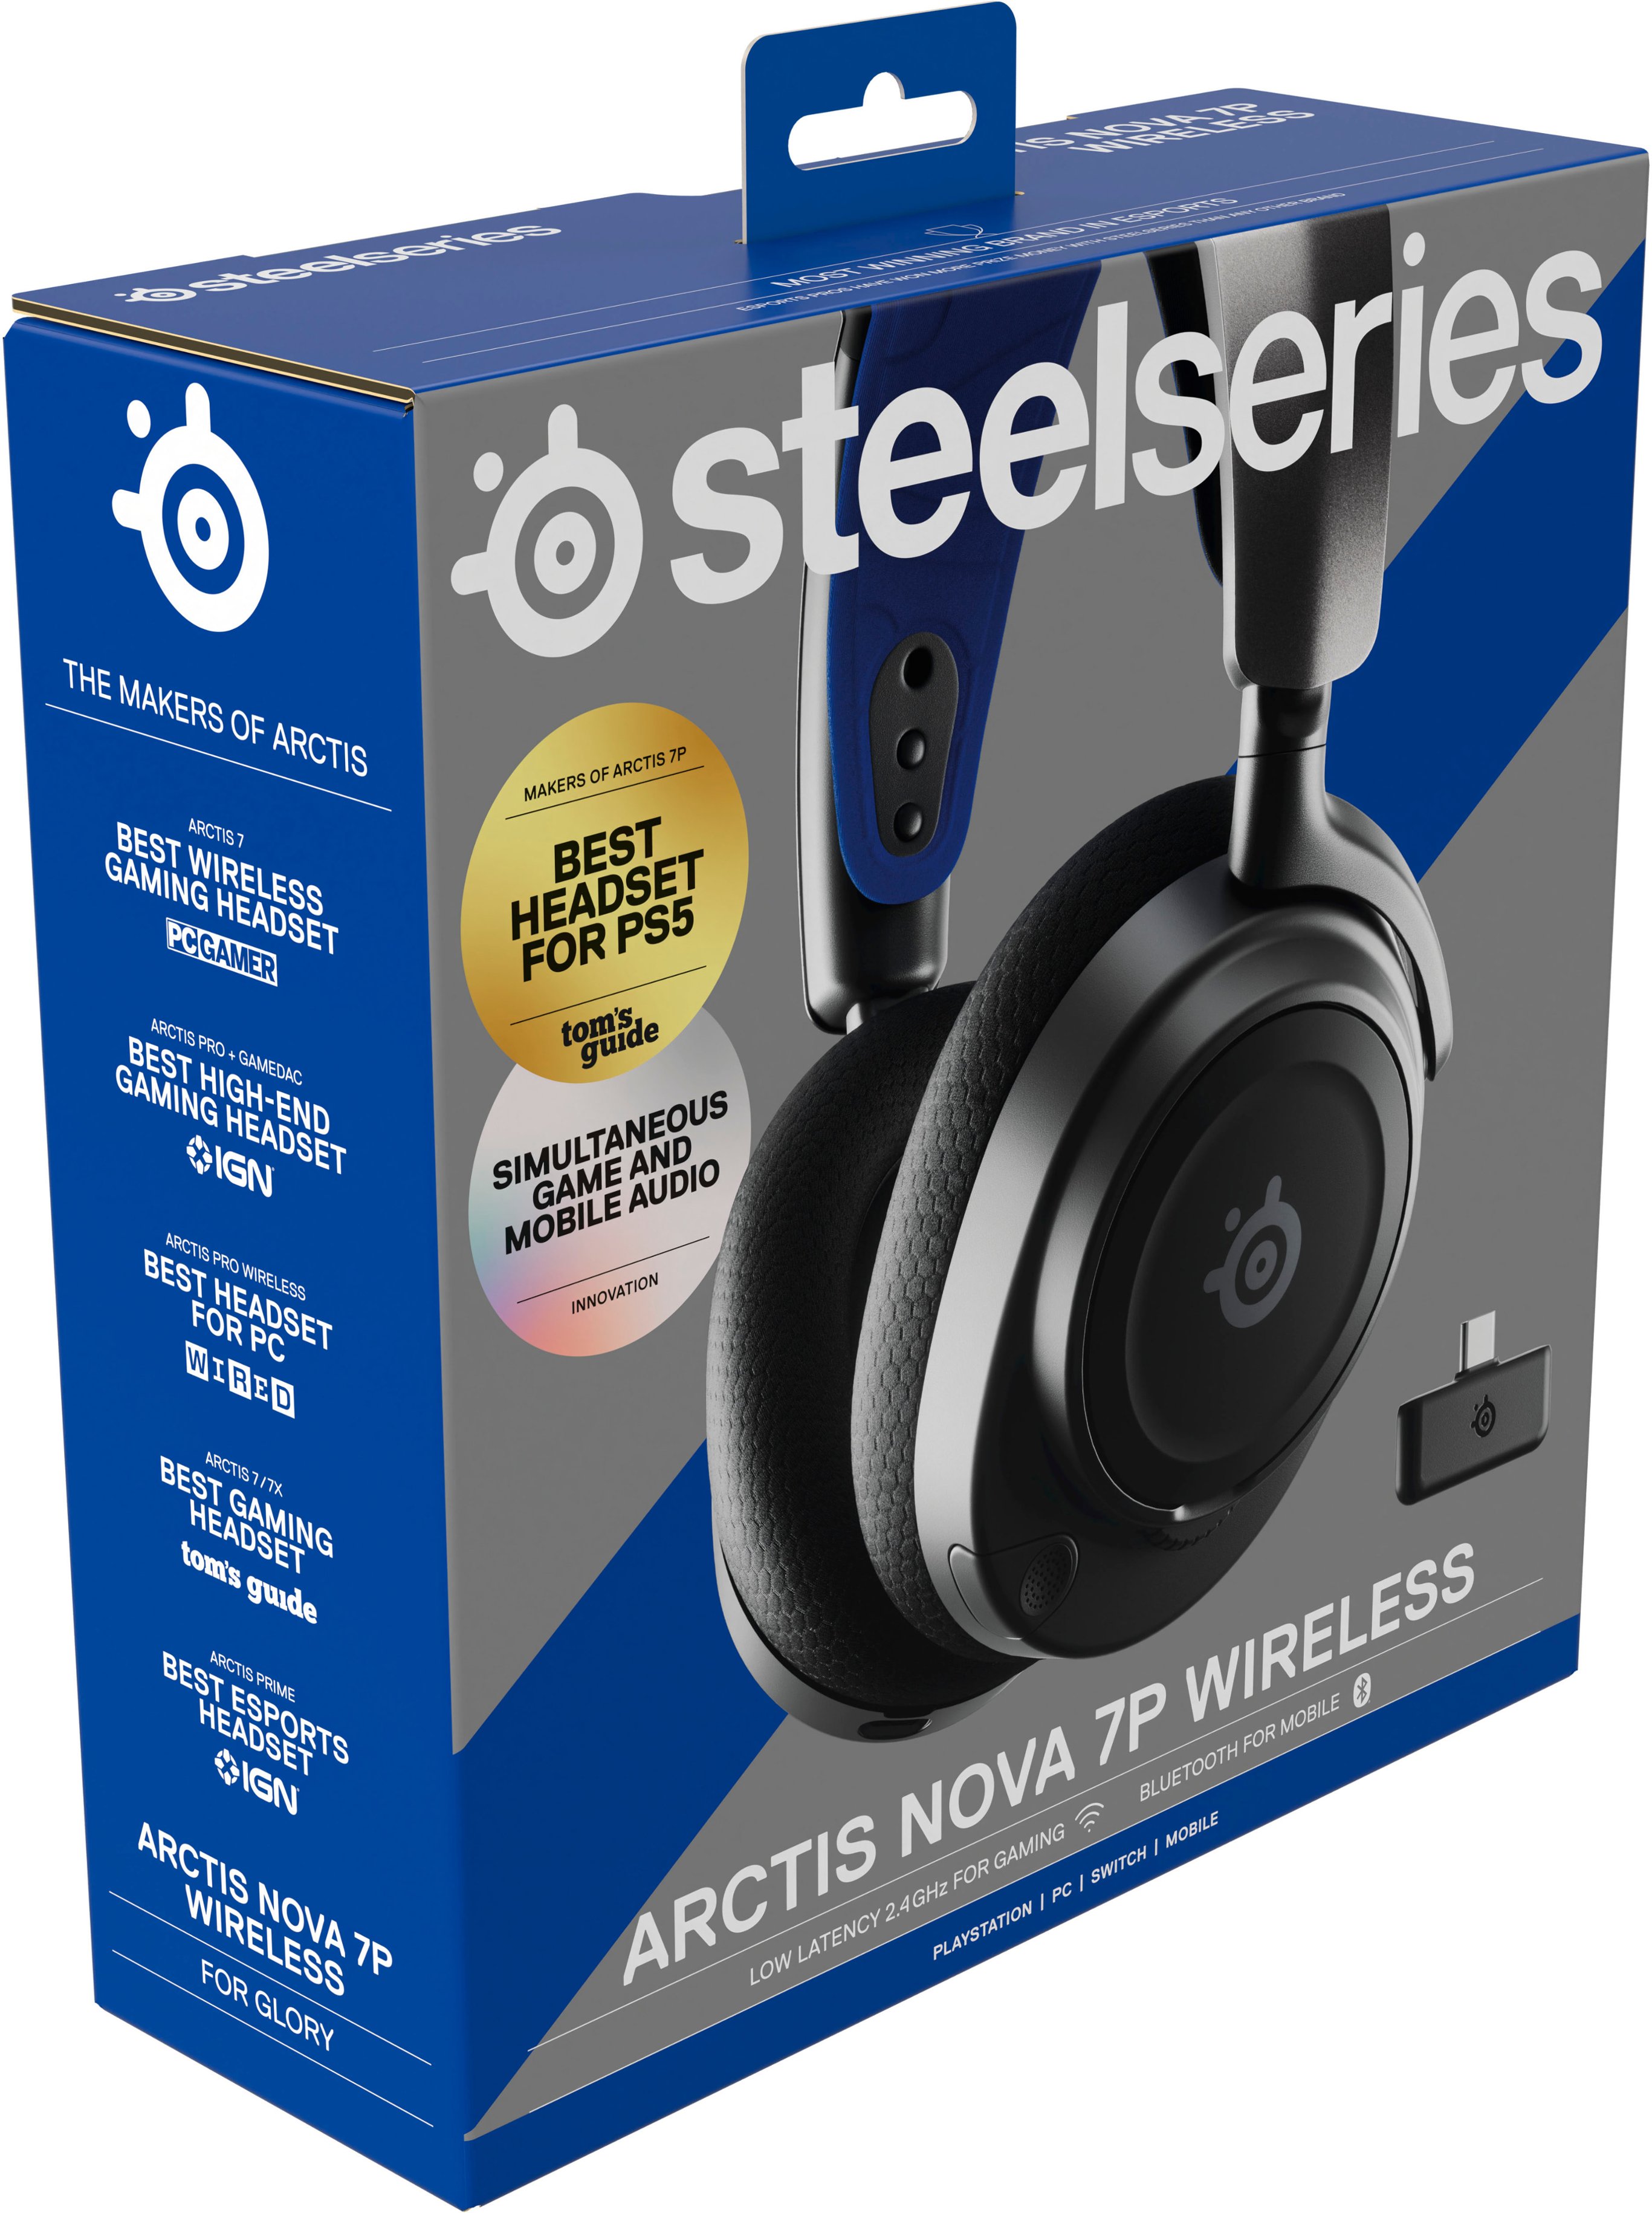 STEELSERIES ARCTIS NOVA 1 WIRED GAMING HEADSET FOR PC, PS4